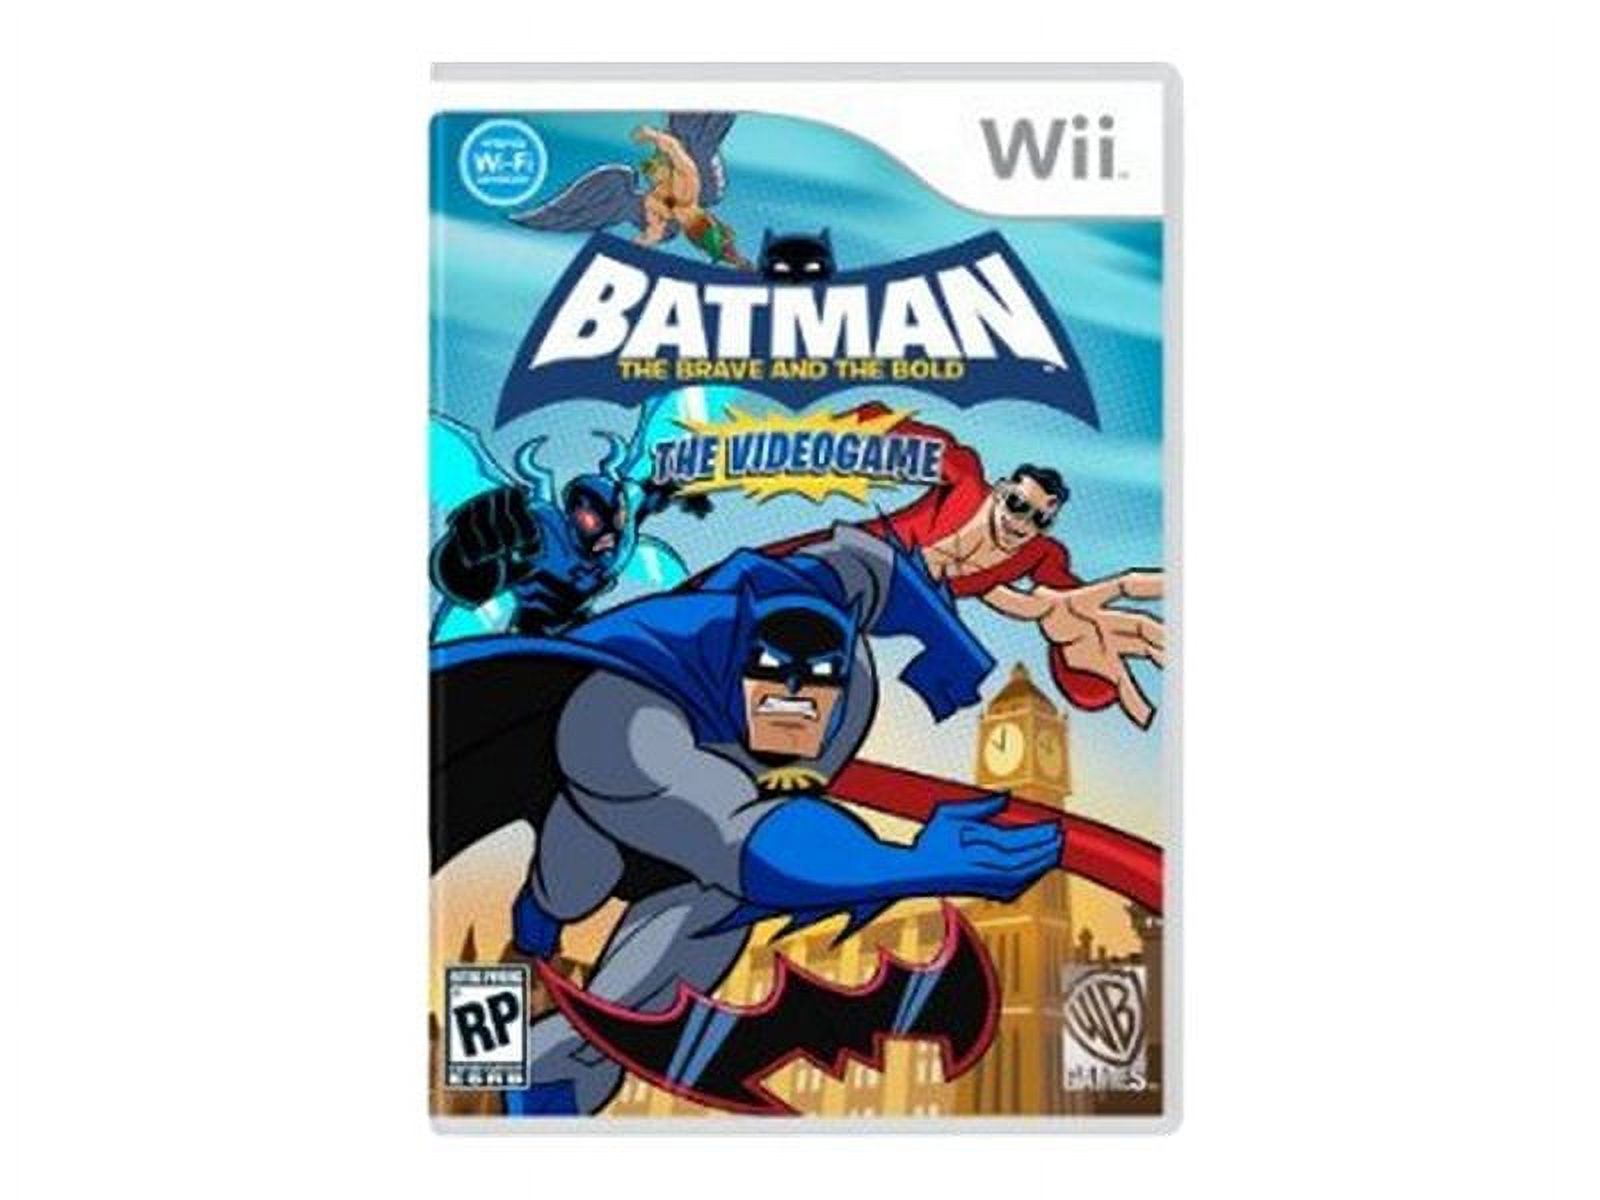 Batman: The Brave and the Bold - Nintendo Wii Warner Bros. - image 1 of 7